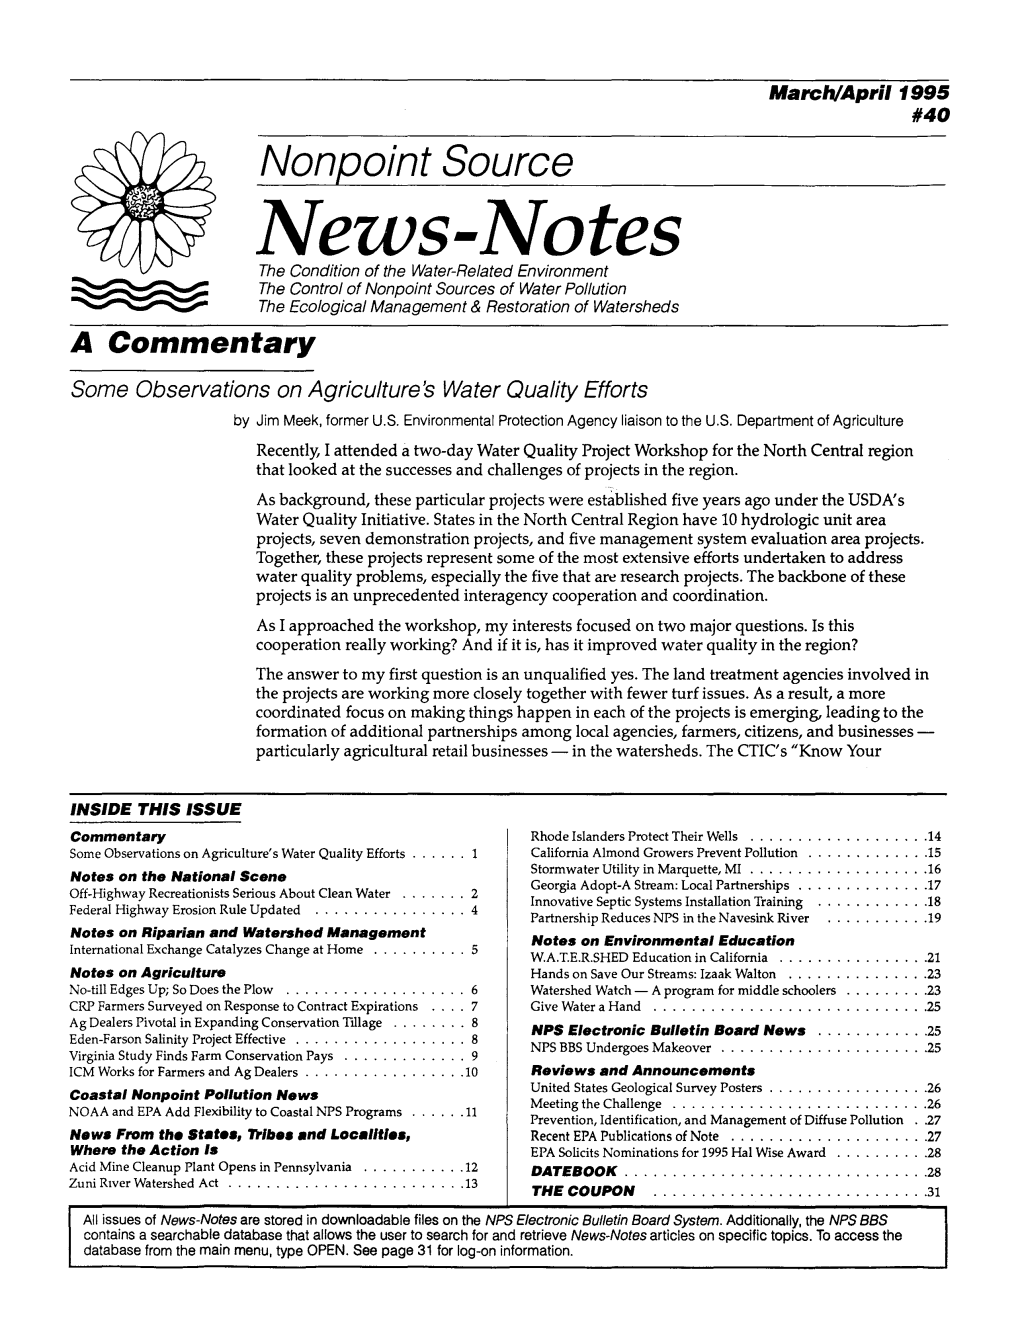 Nonpoint Source News-Notes, Issue 40, March/April 1995